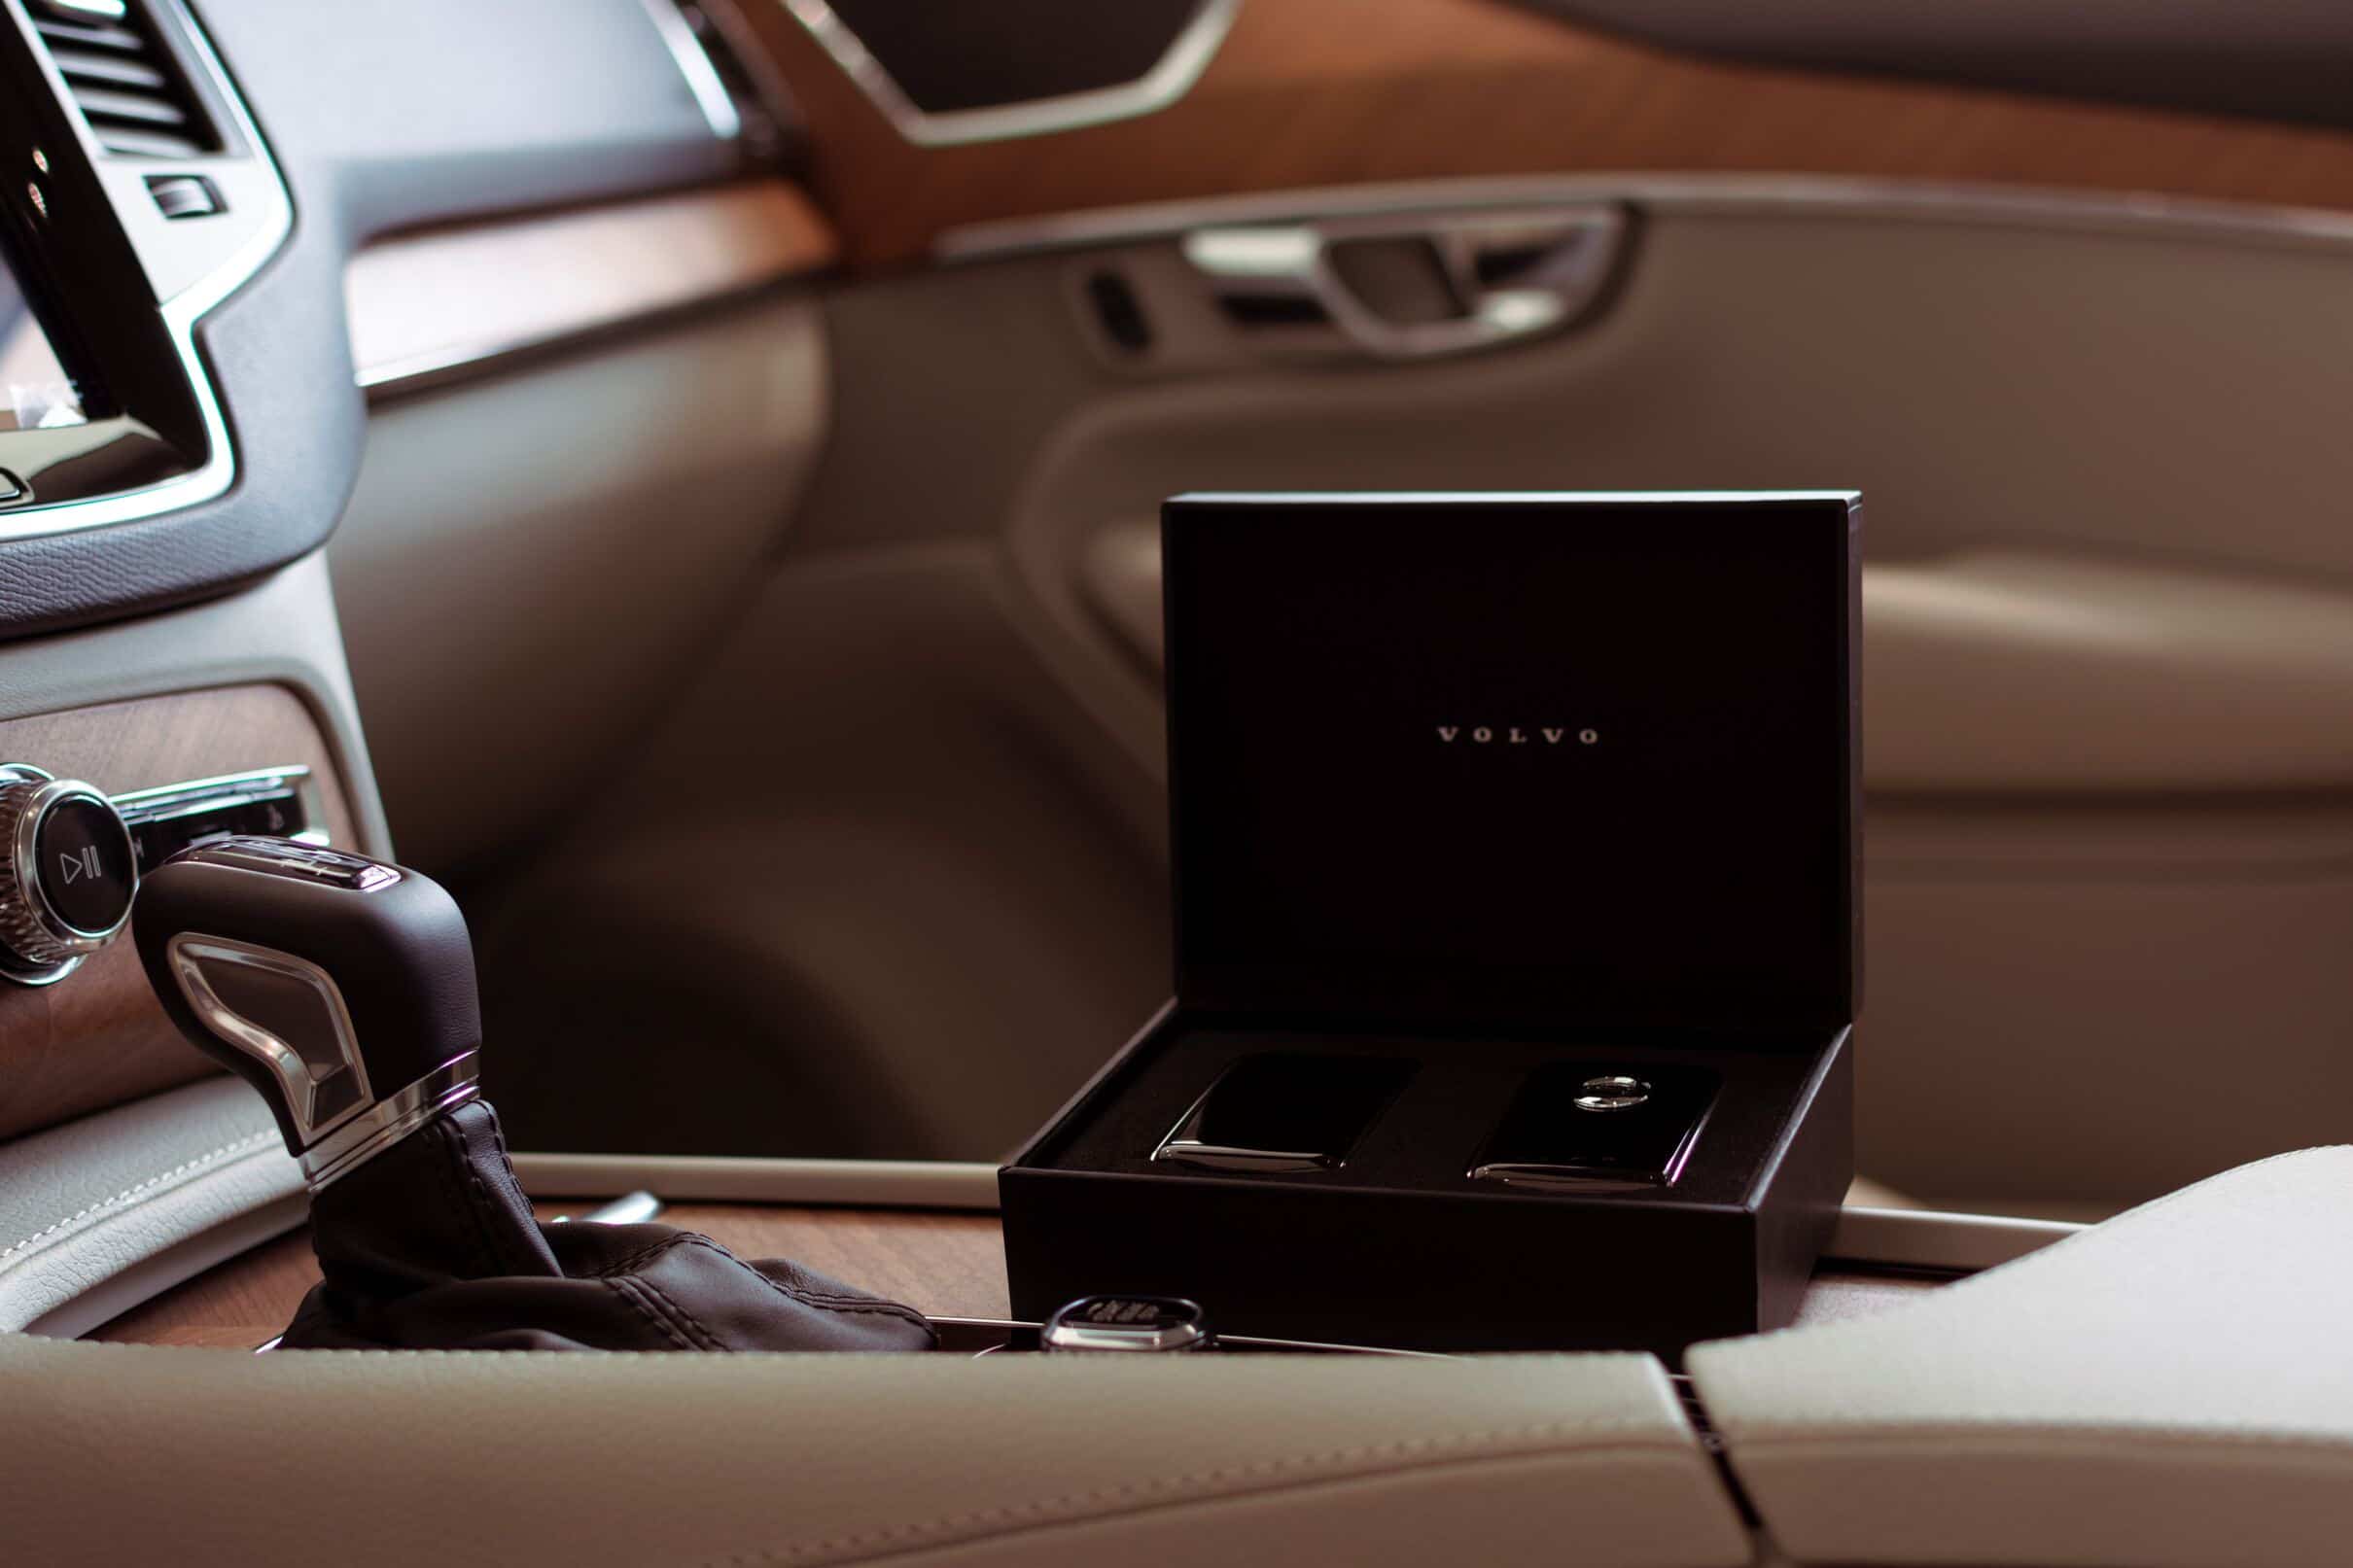 Interior of the Volvo XC90, showcasing luxurious design and advanced technology.

